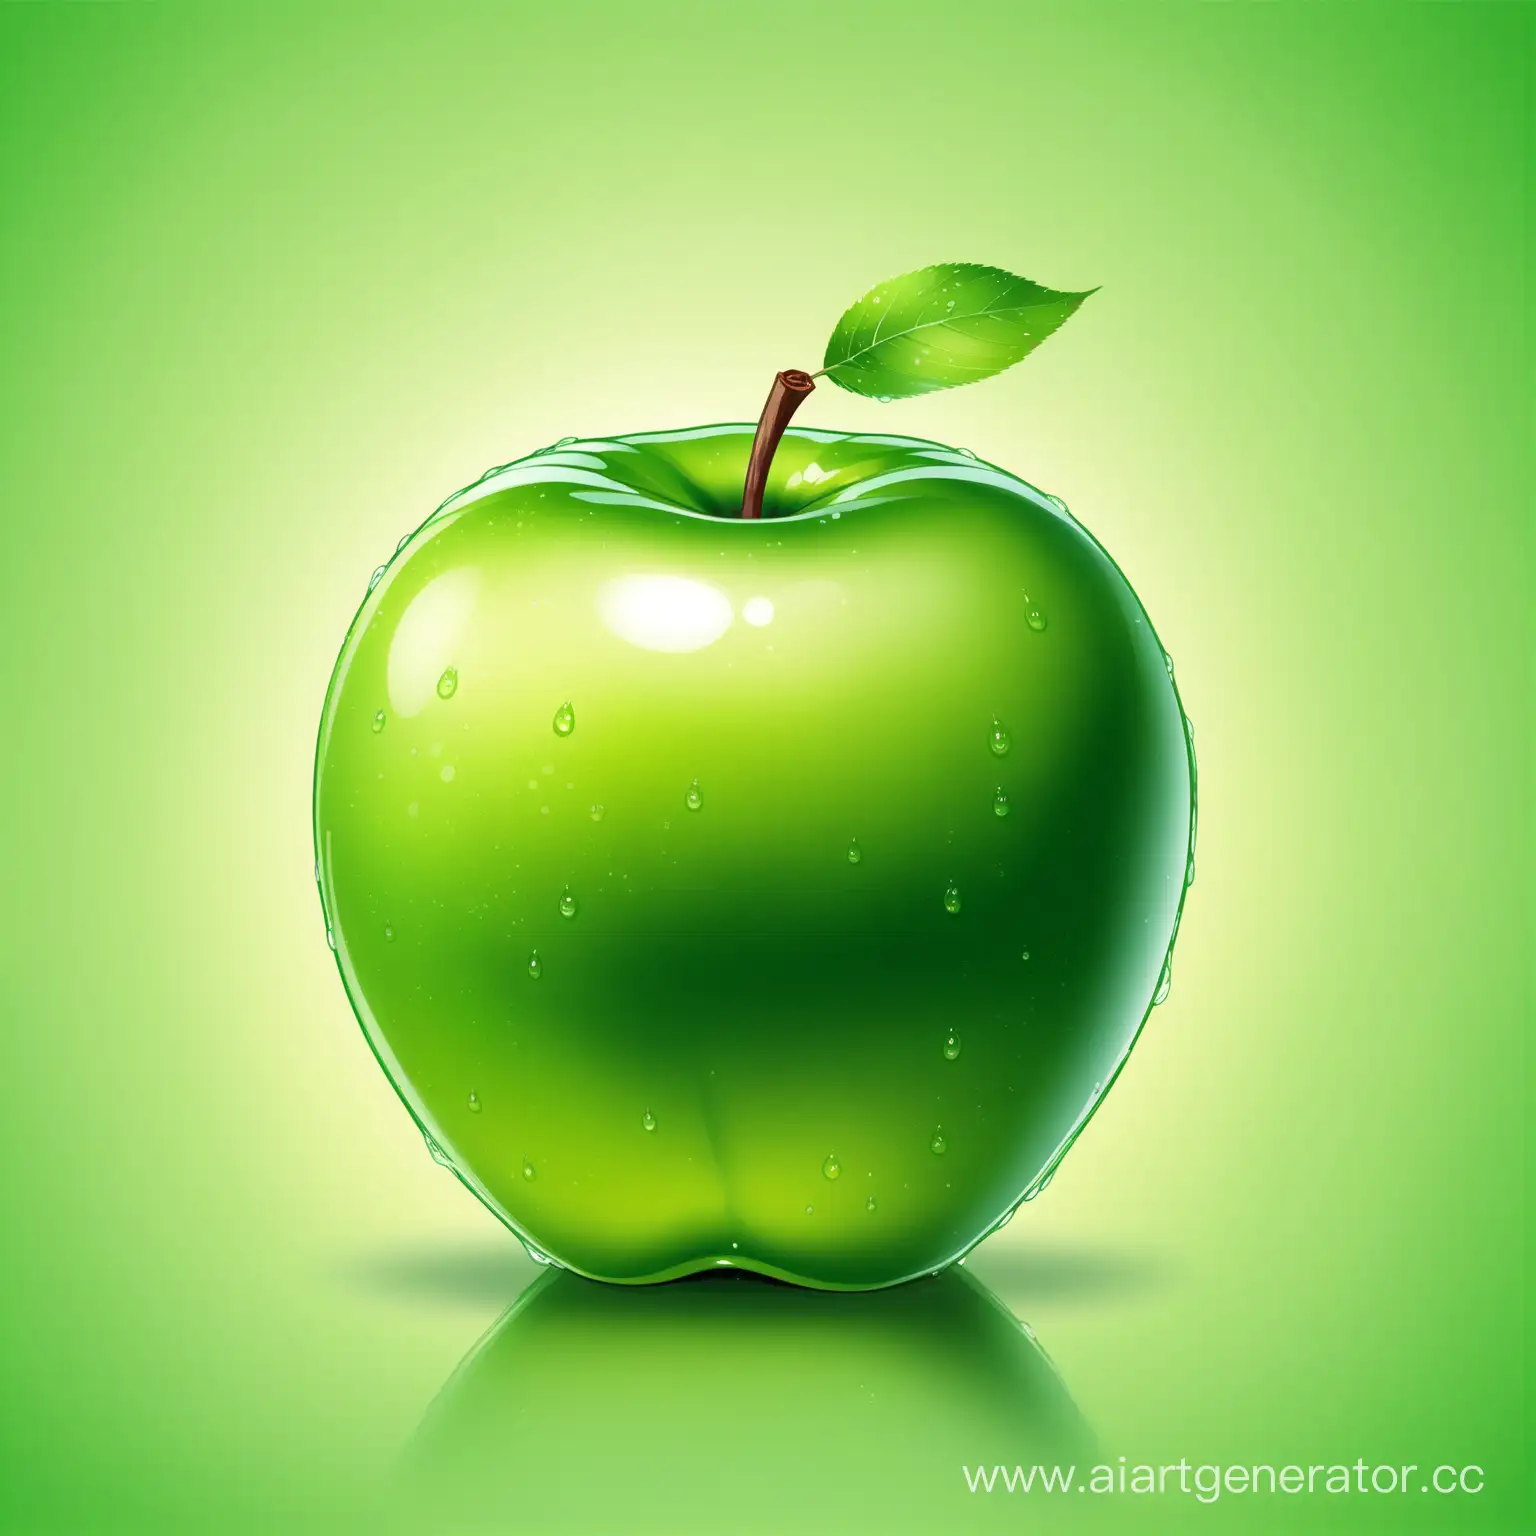 Vibrant-Green-Apple-on-Display-Freshness-and-Beauty-Captured-in-a-Singular-Fruit